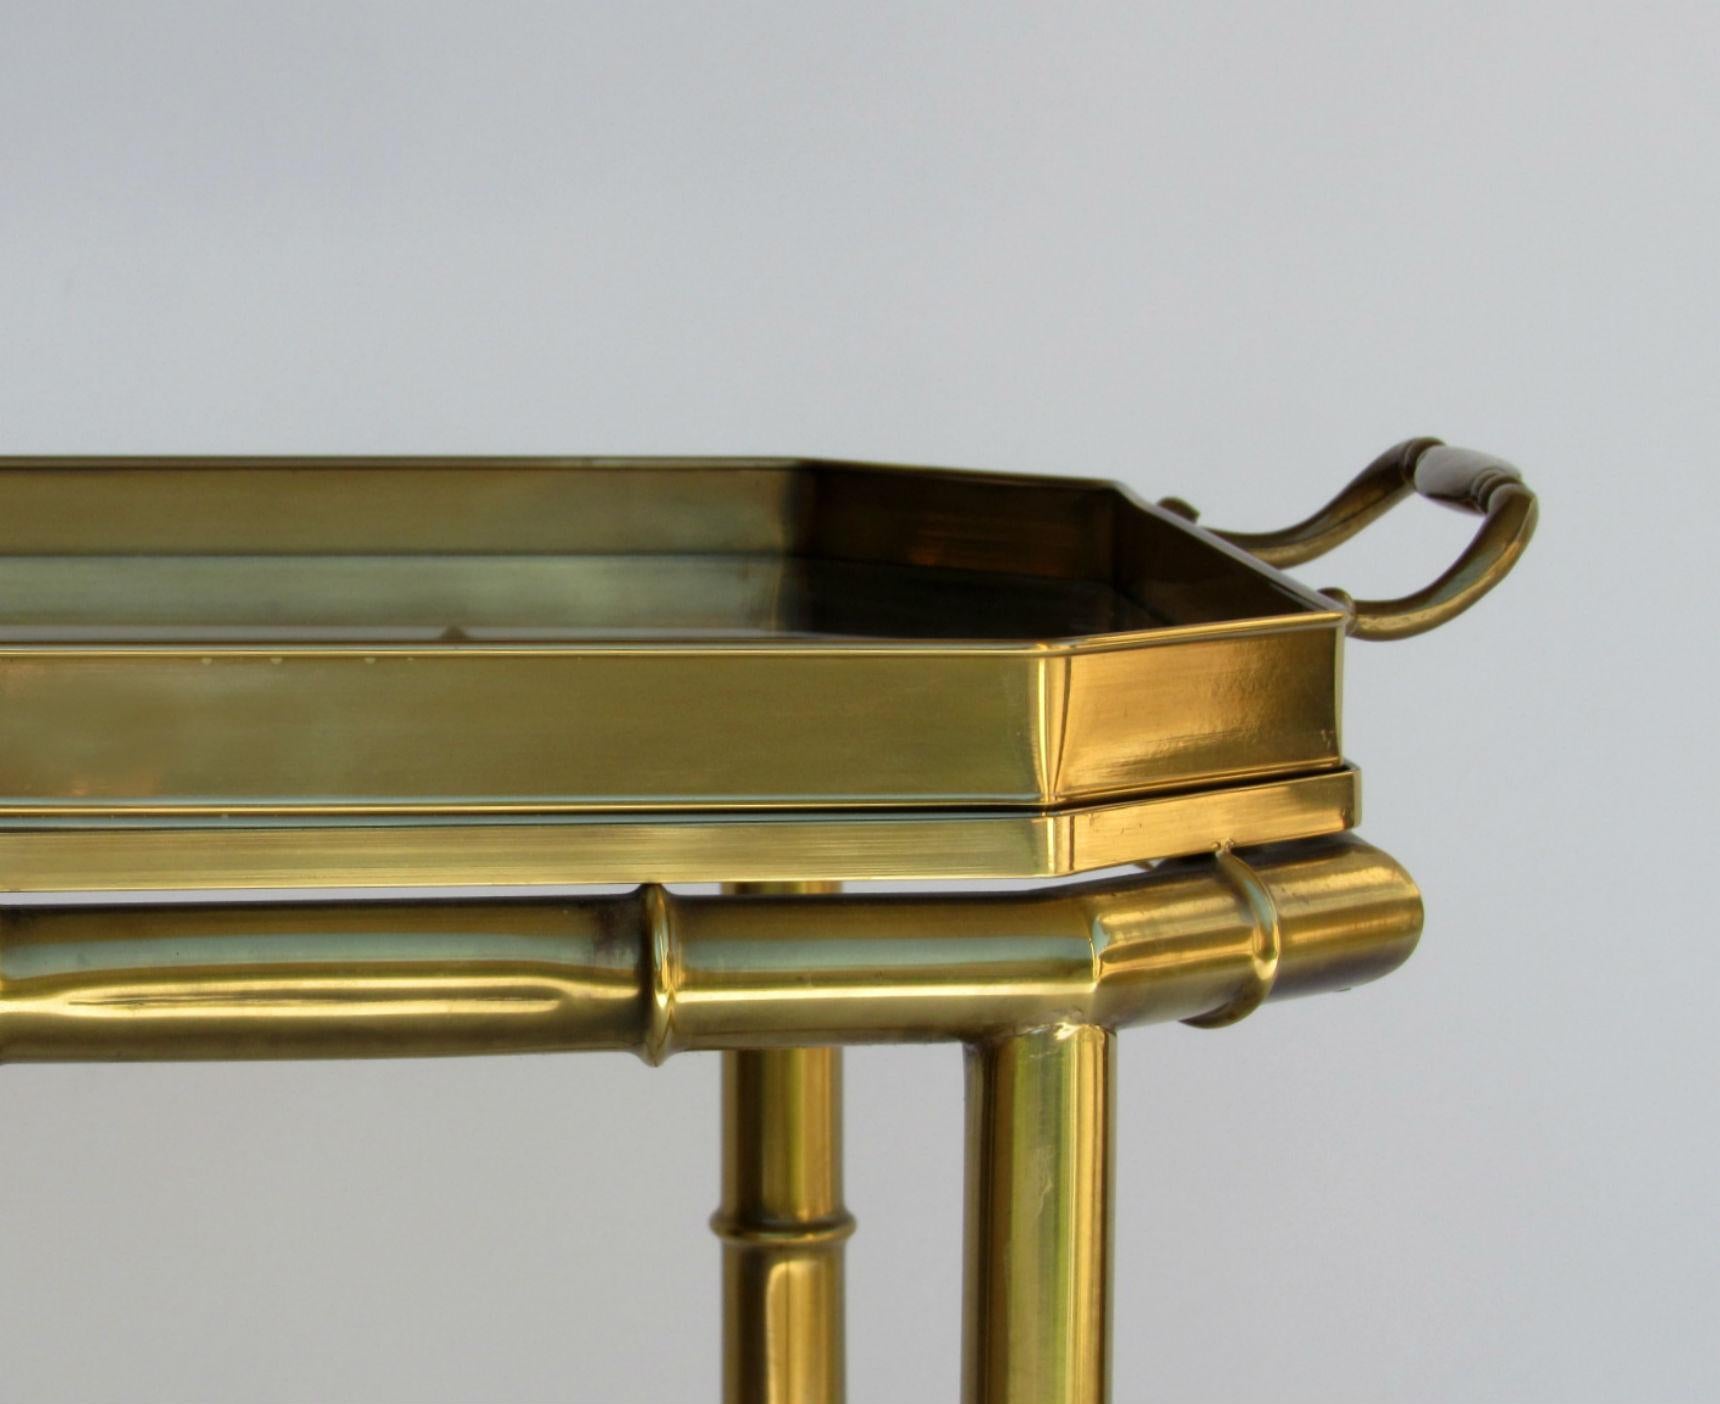 American Mastercraft Bamboo Tray Table in Antique Brass, USA, 1960s-1970s